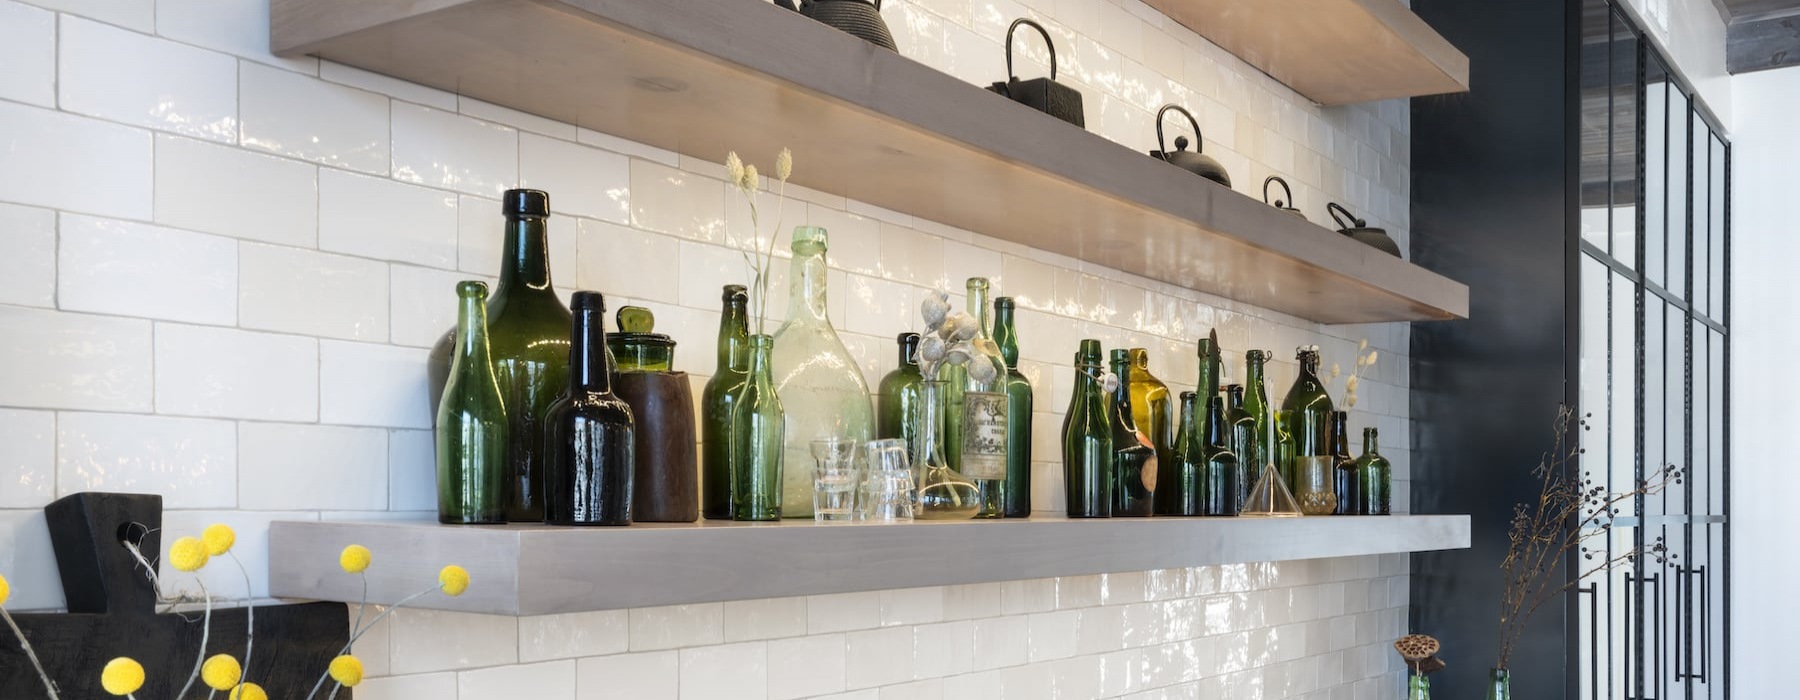 close-up of shelves in kitchen